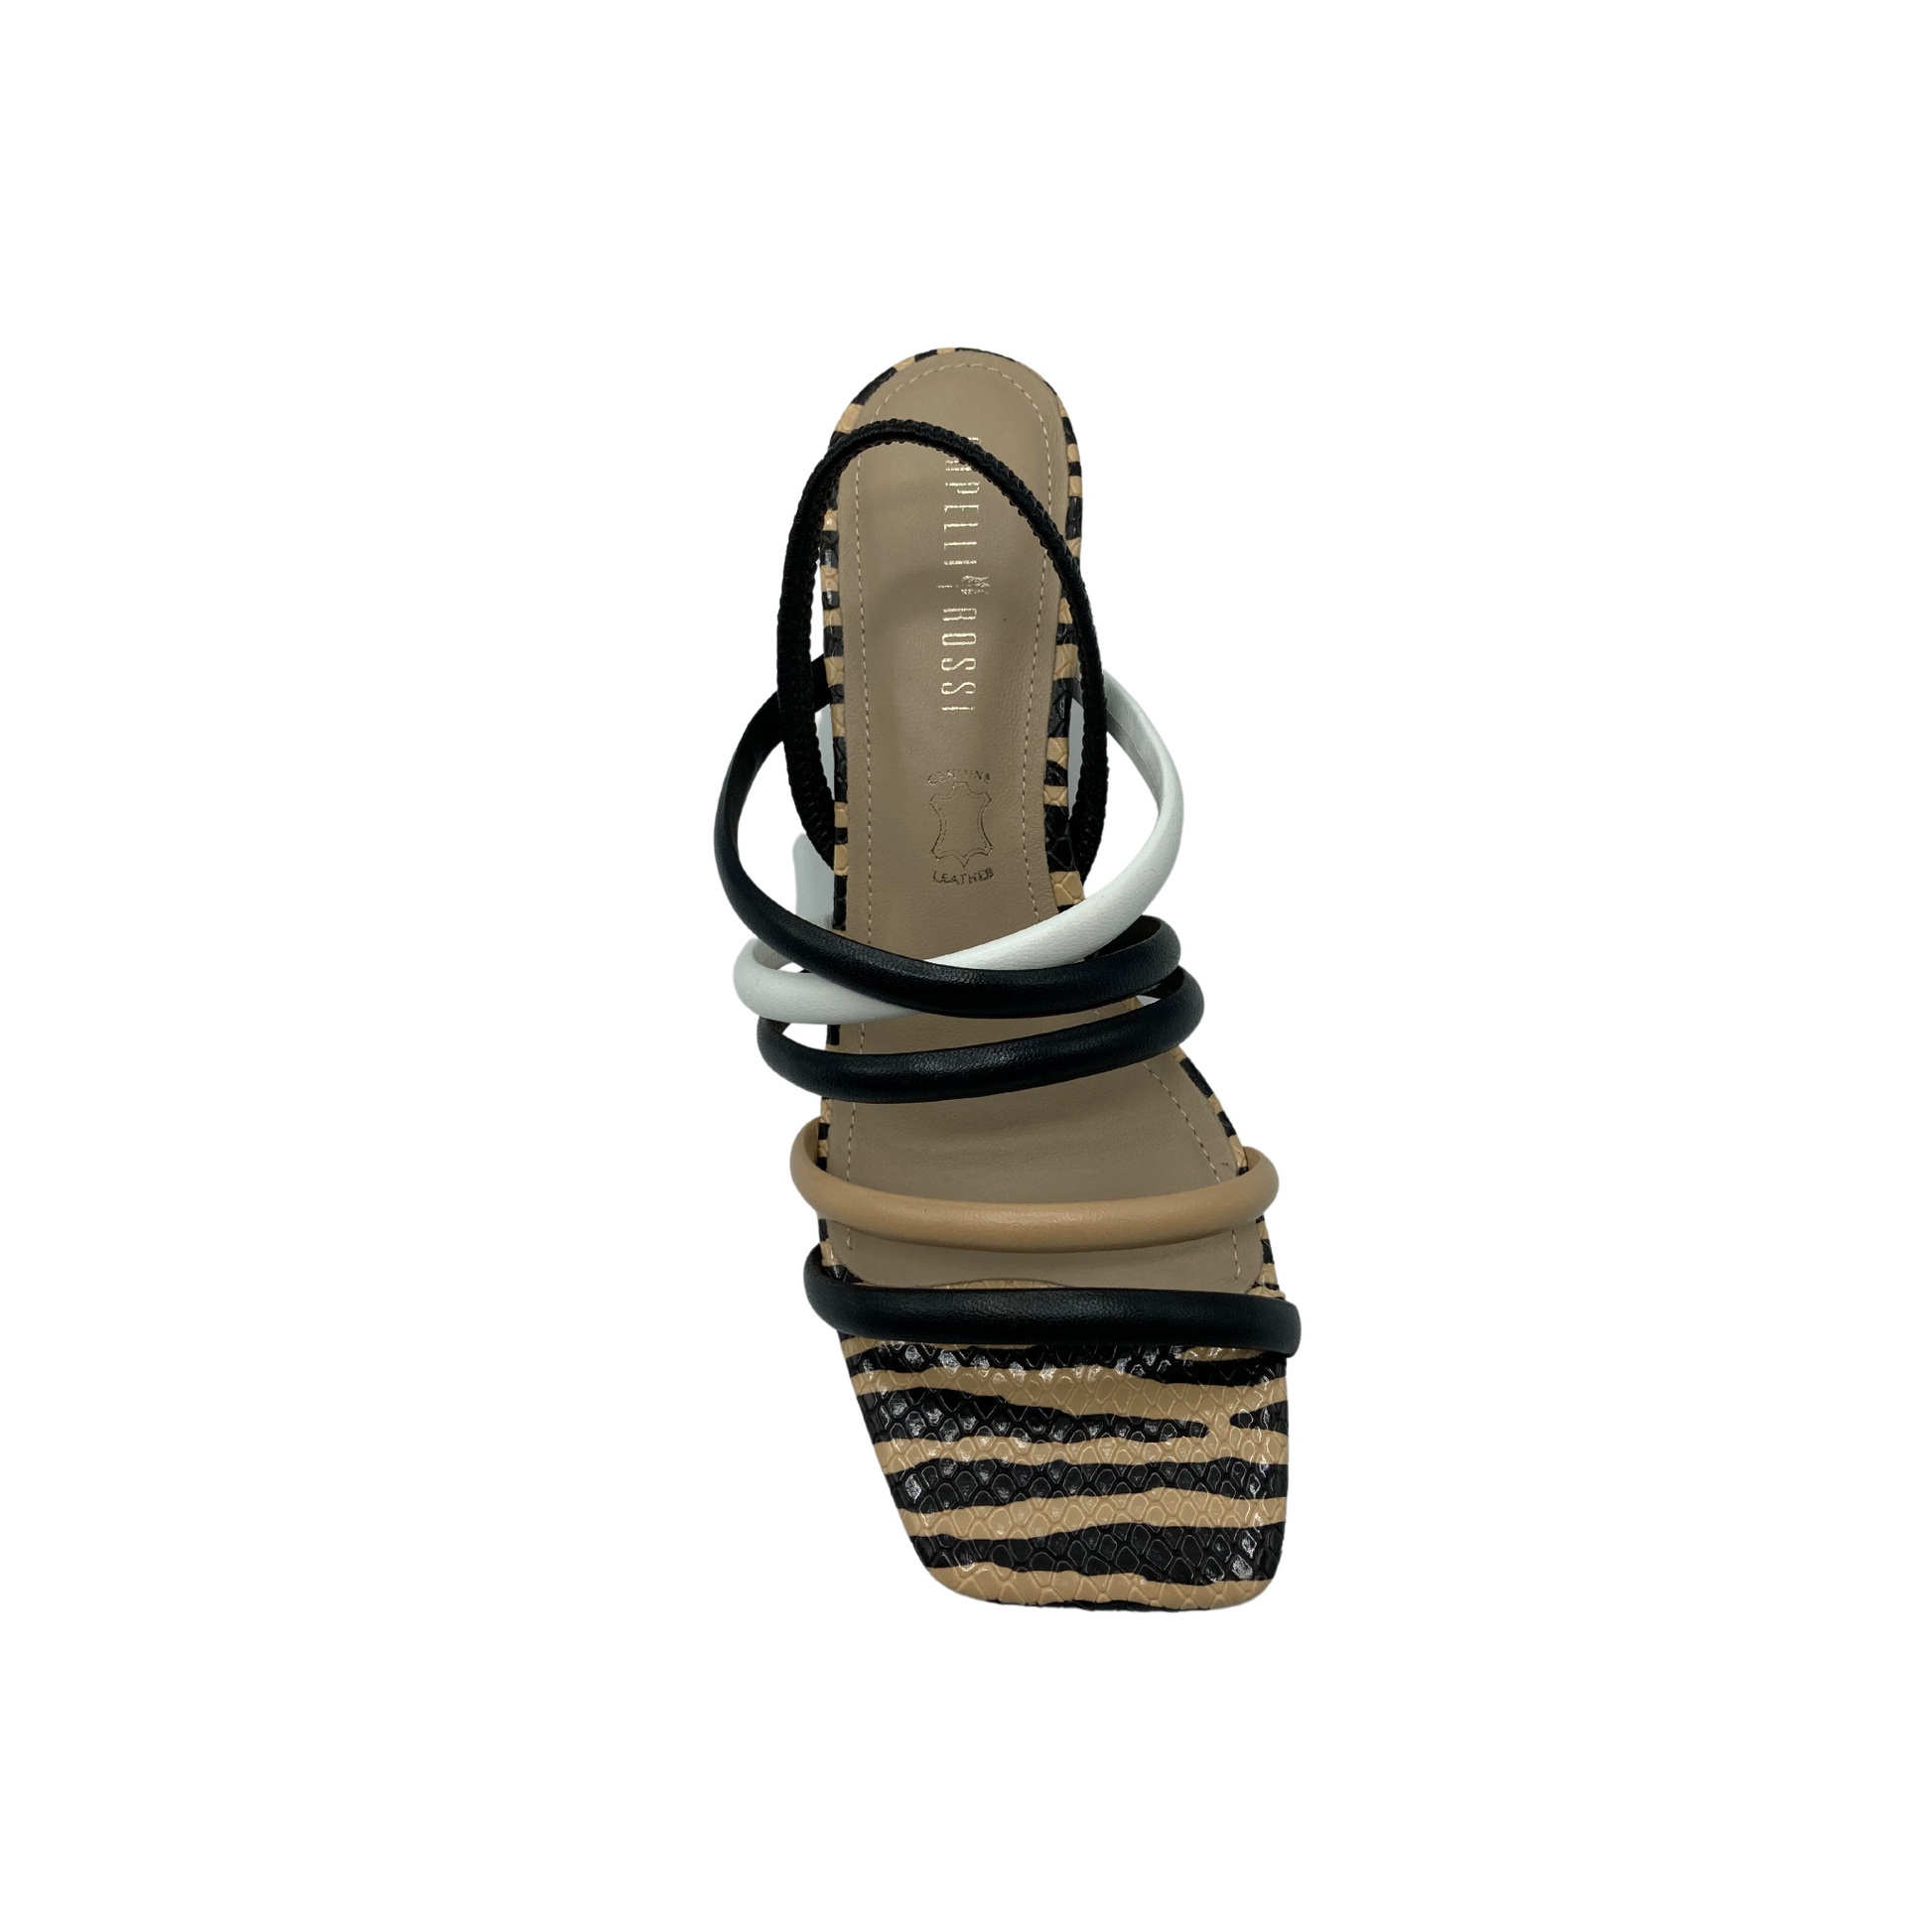 Top down view of strappy sandal.with taupe/black zebra stripe at toe box and heel